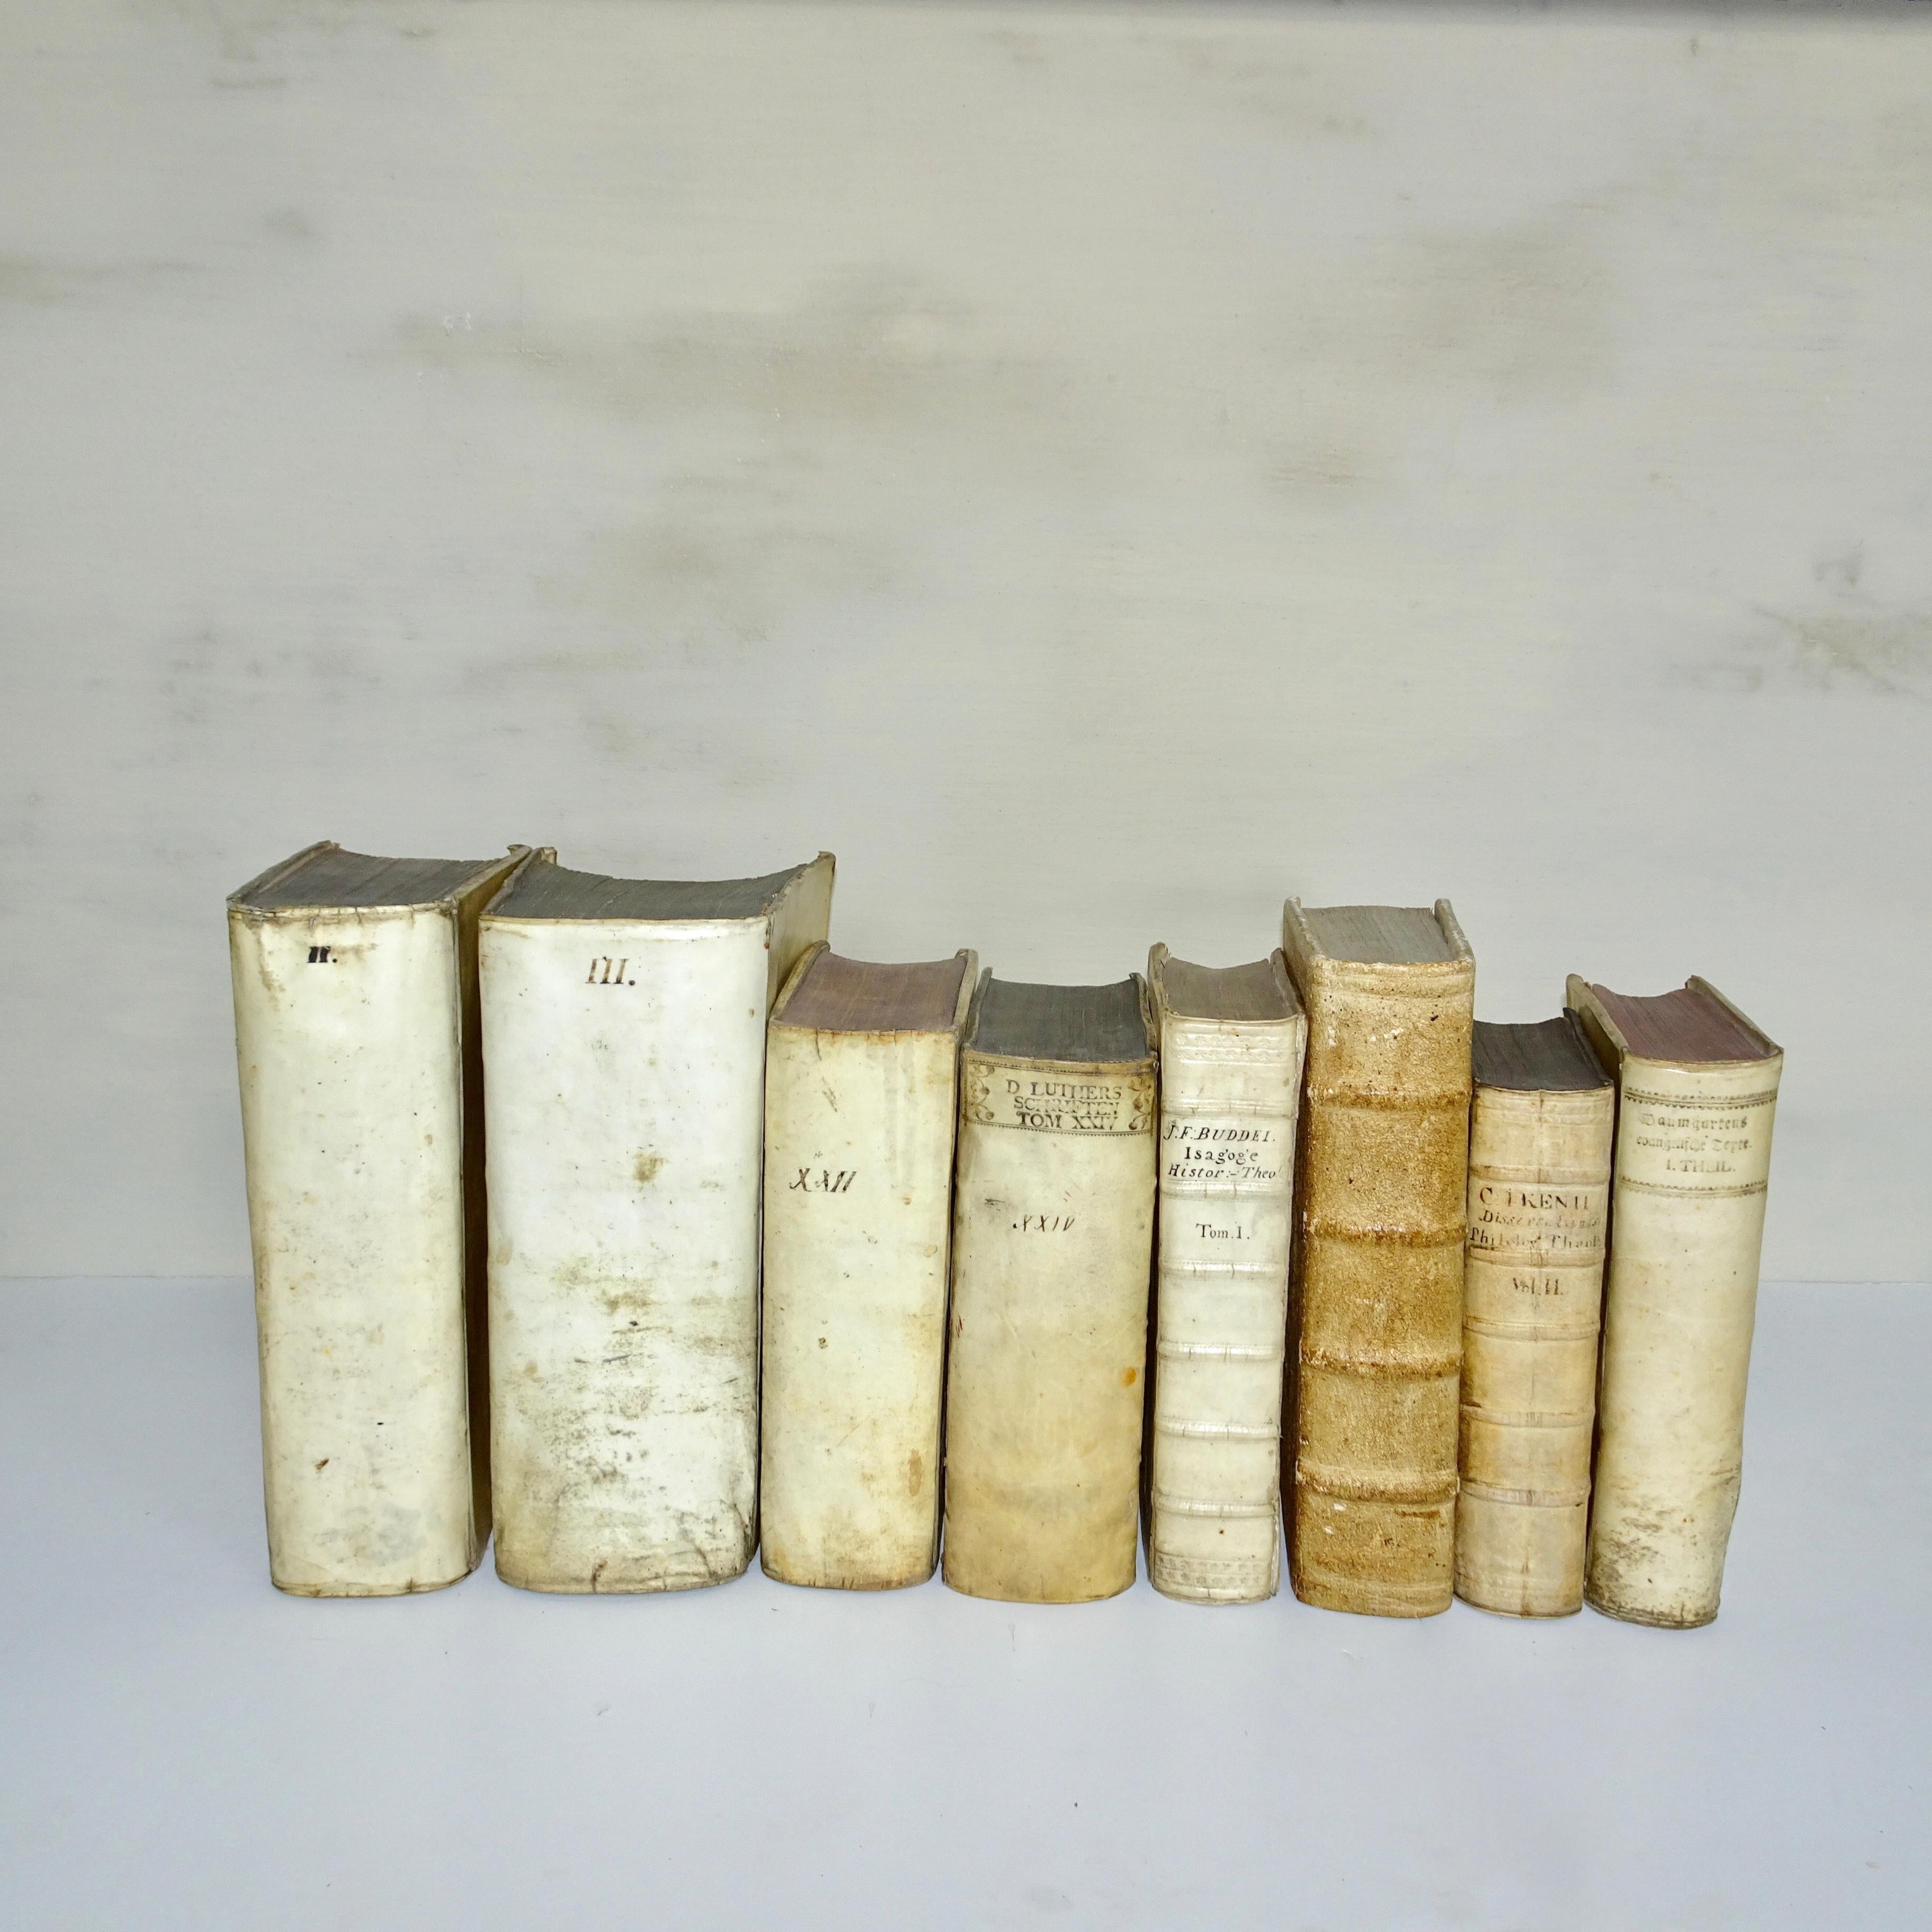 A collection of all vellum books in a smaller size from the 17th and 18th century in a collection of eight books.